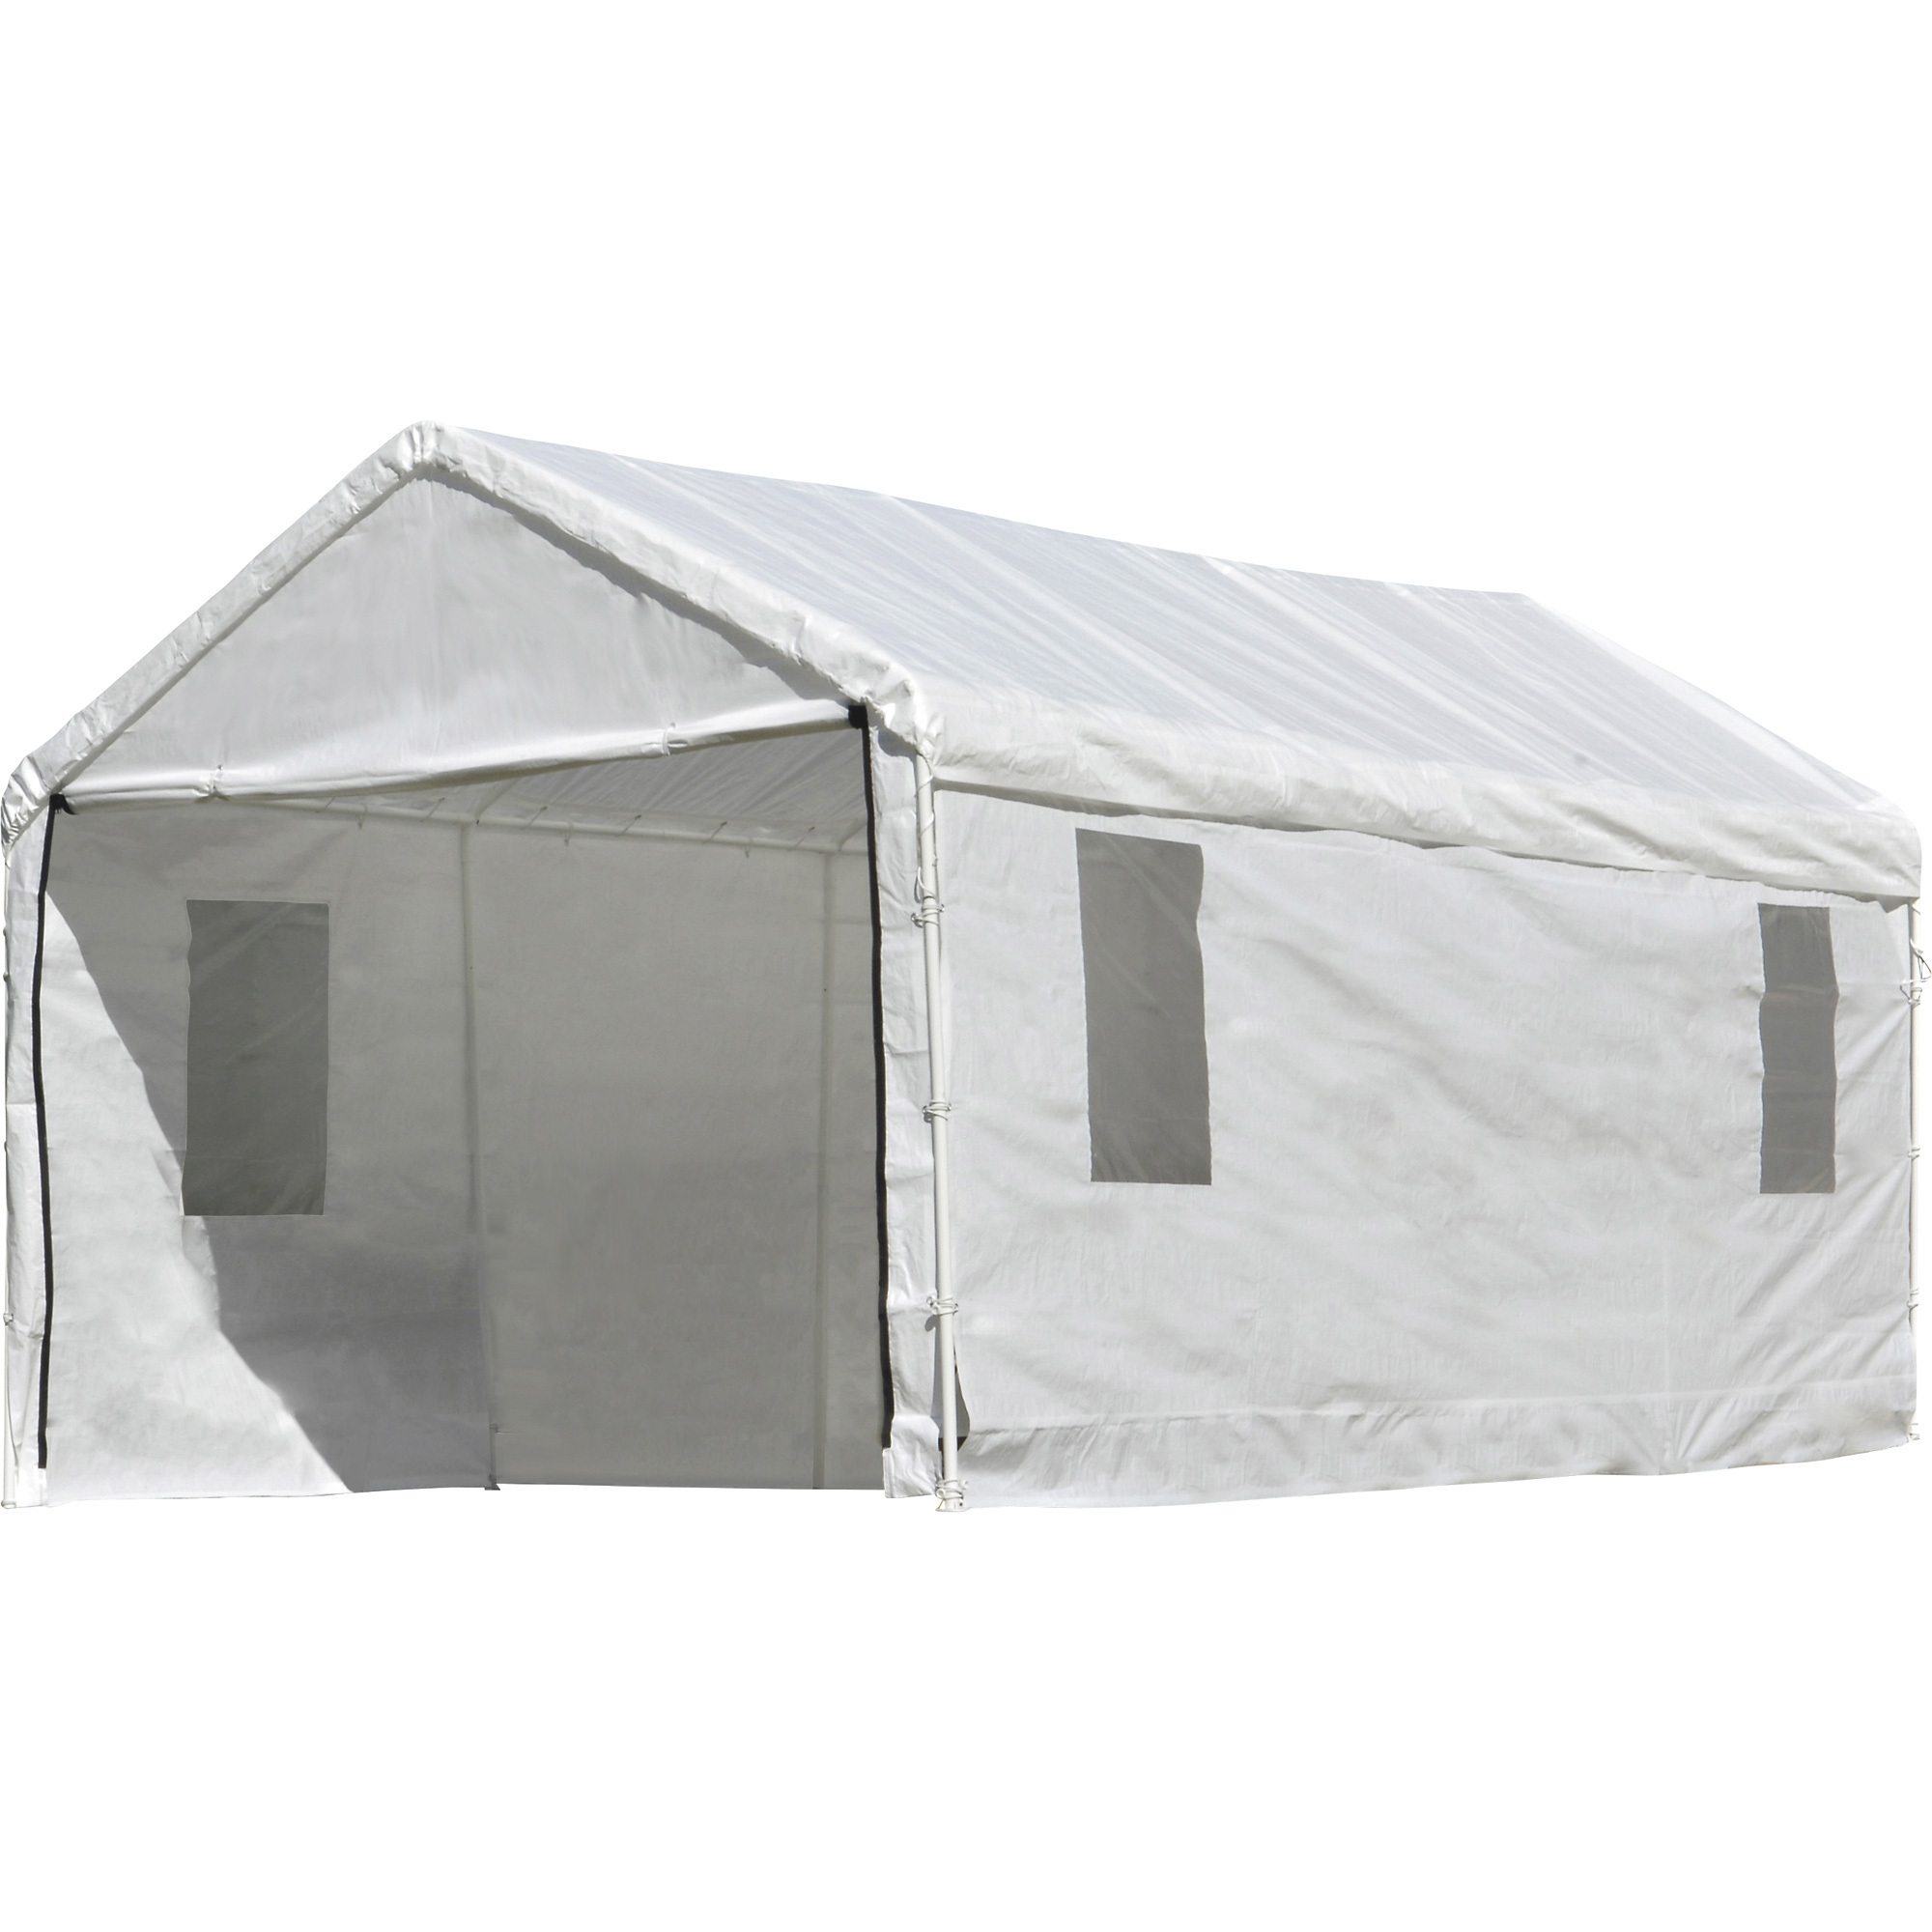 ShelterLogic Outdoor Canopy and Enclosure with Windows, 20ft.L x 10ft.W, White, Model 23534